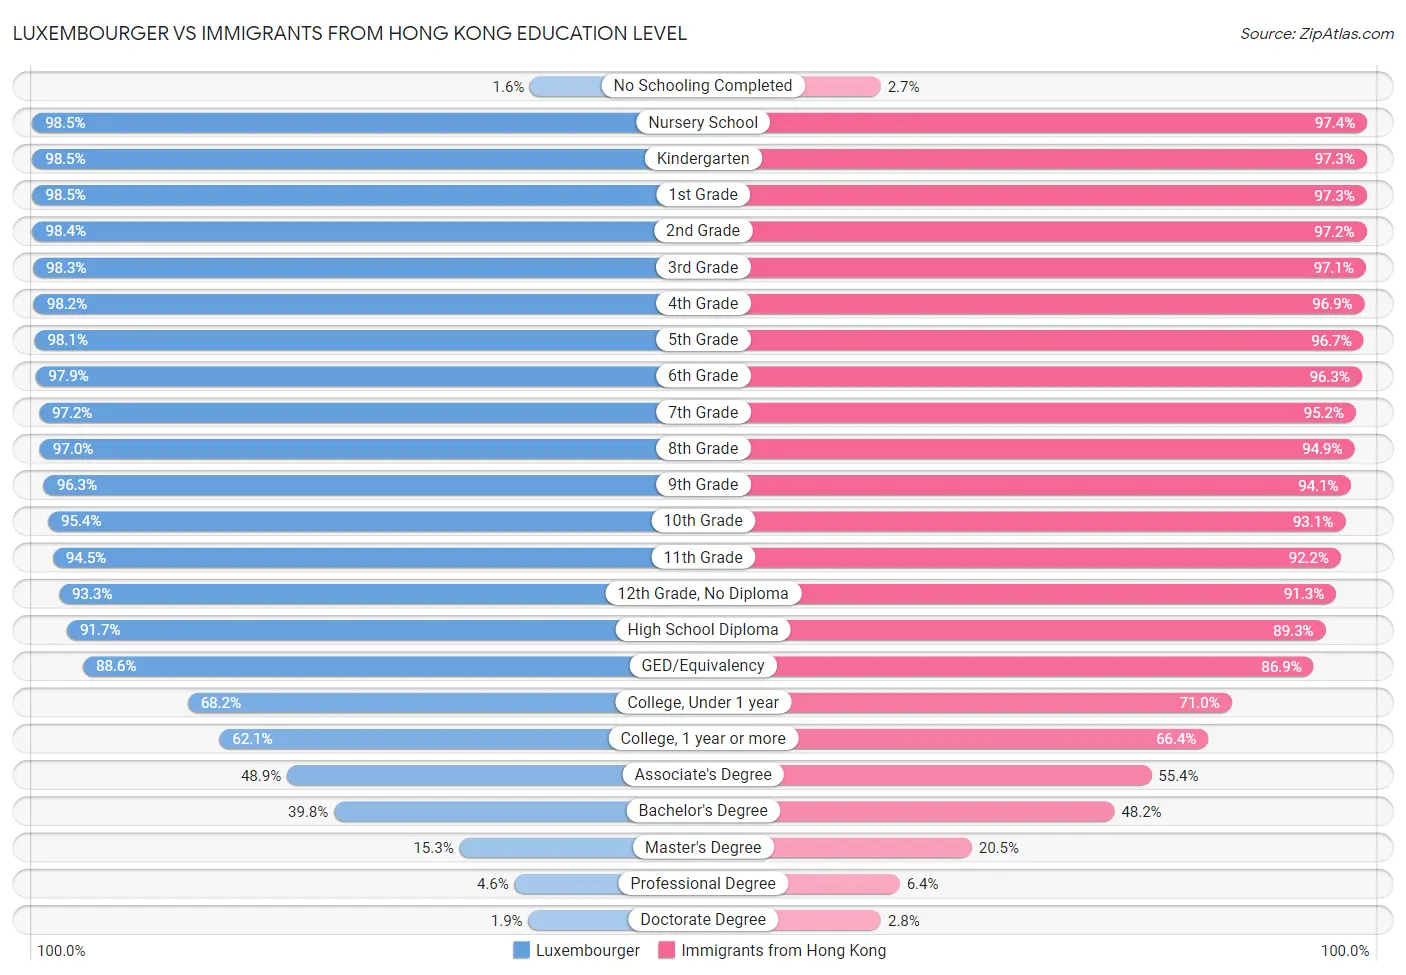 Luxembourger vs Immigrants from Hong Kong Education Level